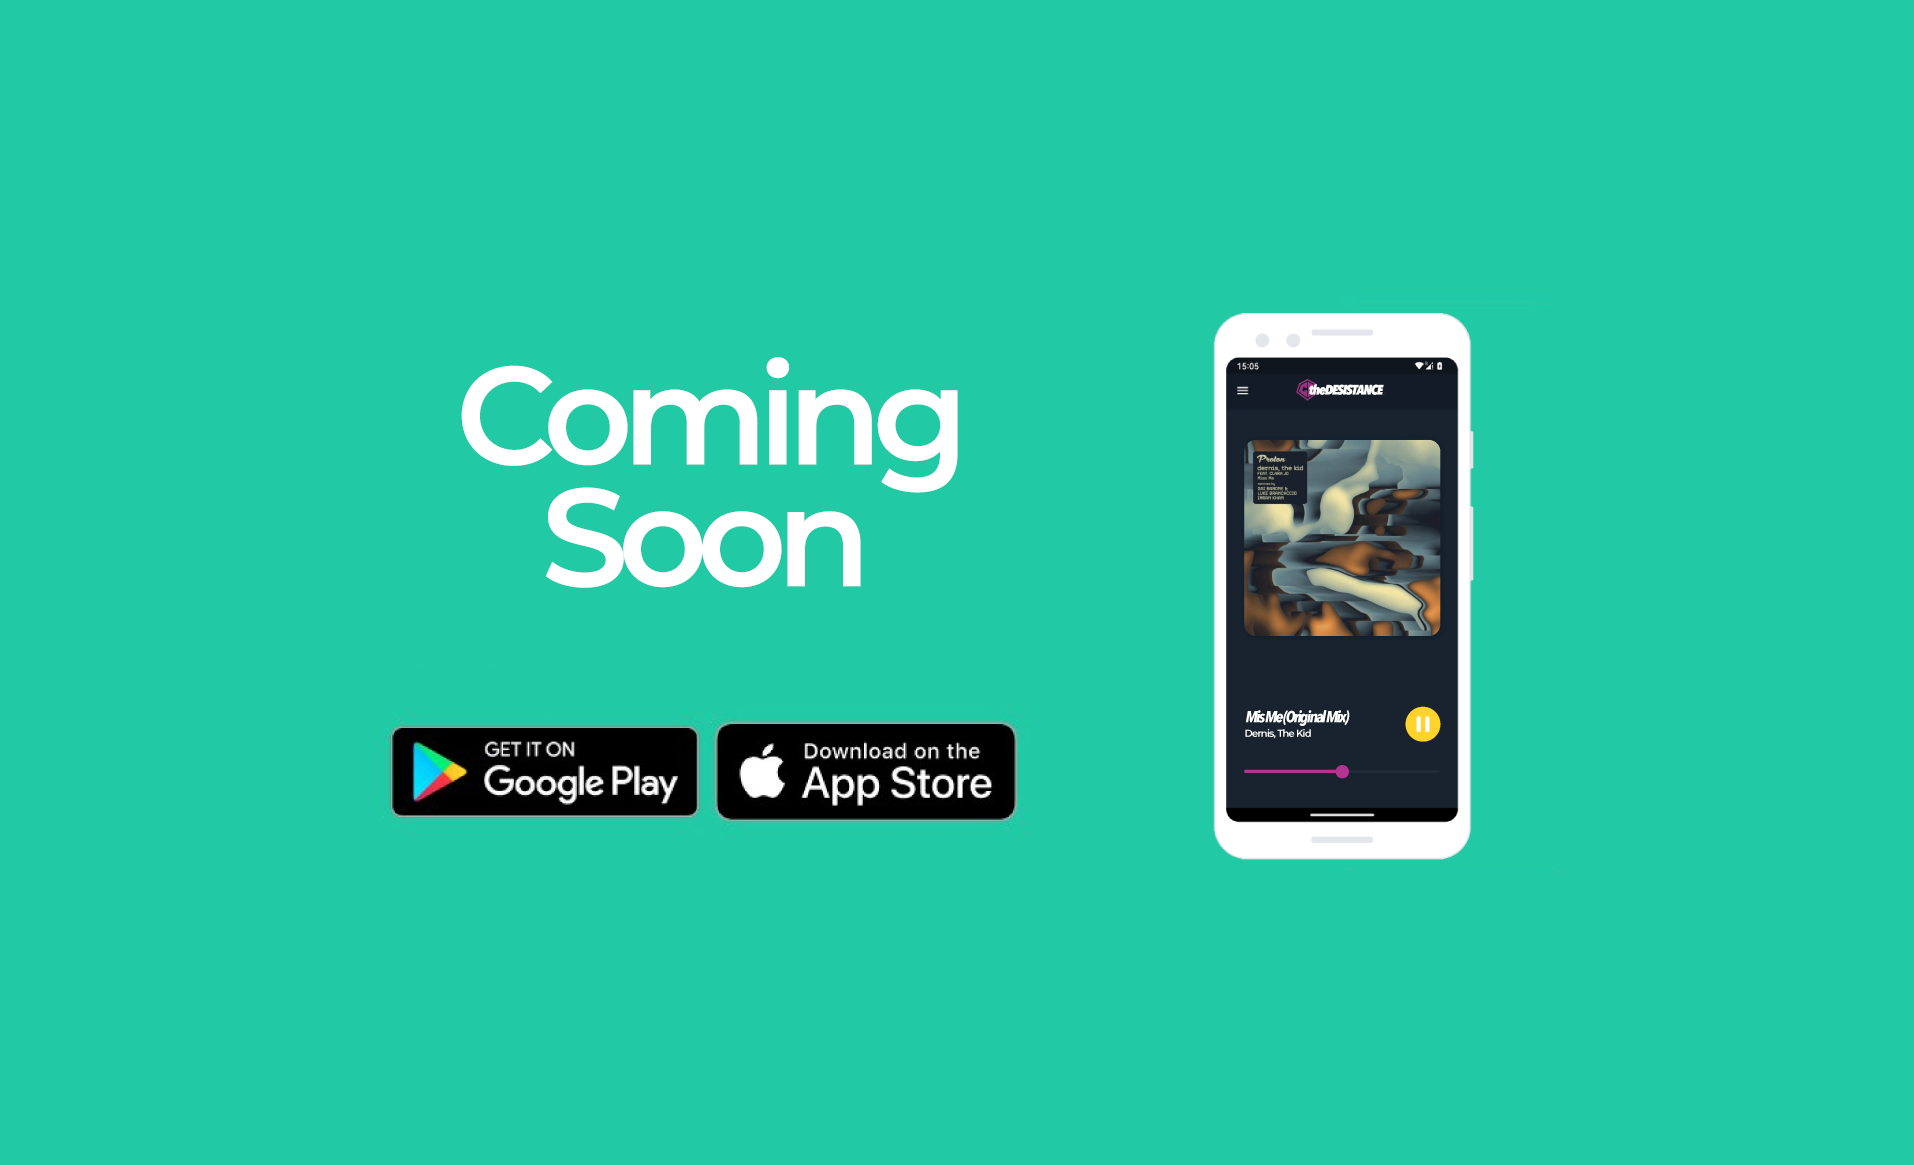 Coming Soon - The Desistance Radio mobile app for Apple & Android